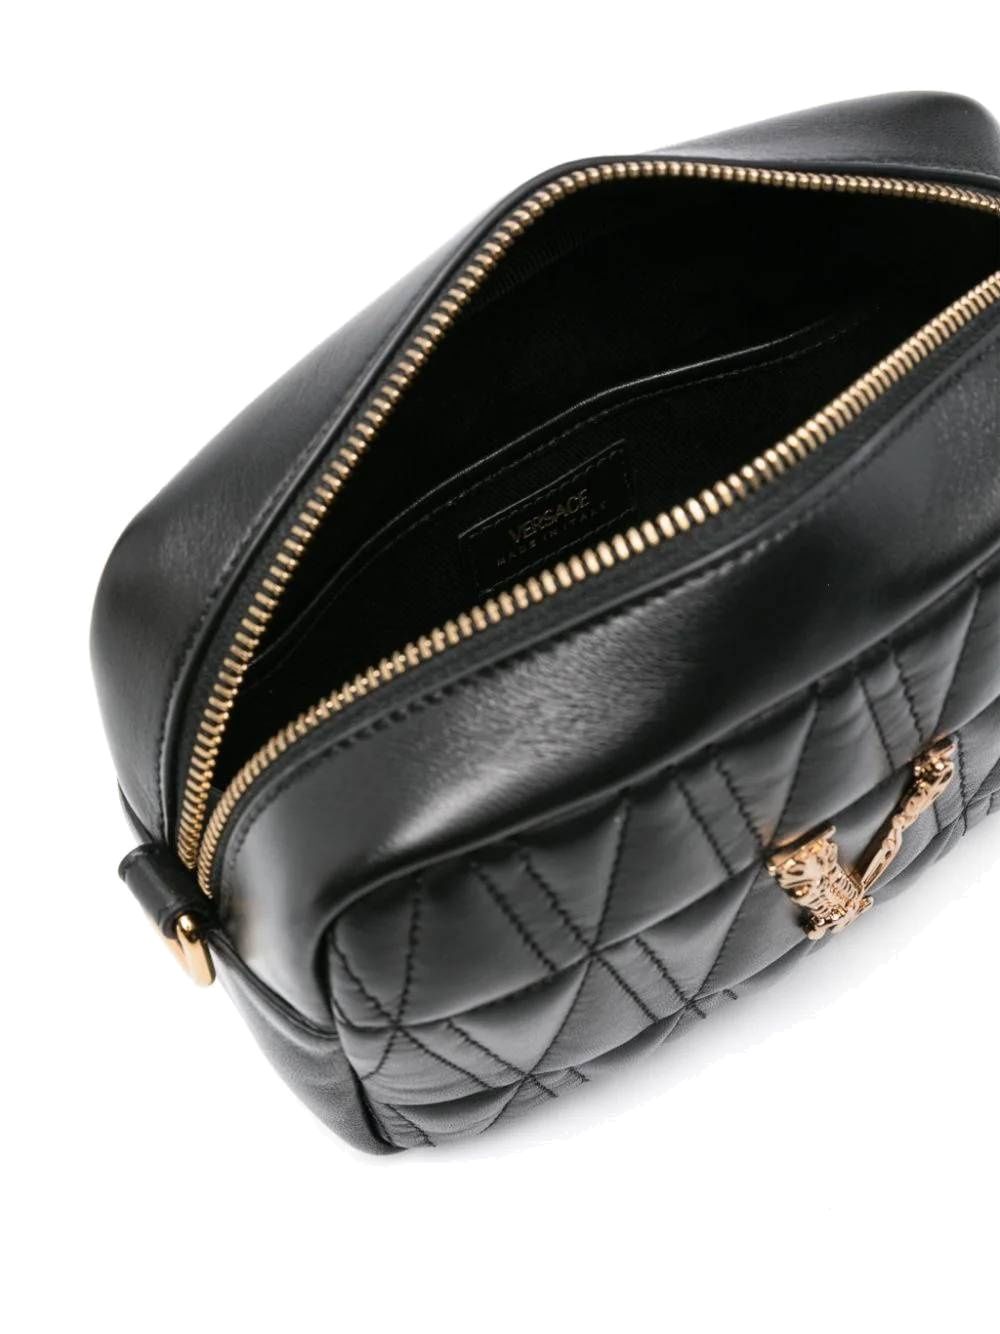 Quilted black nappa leather bag